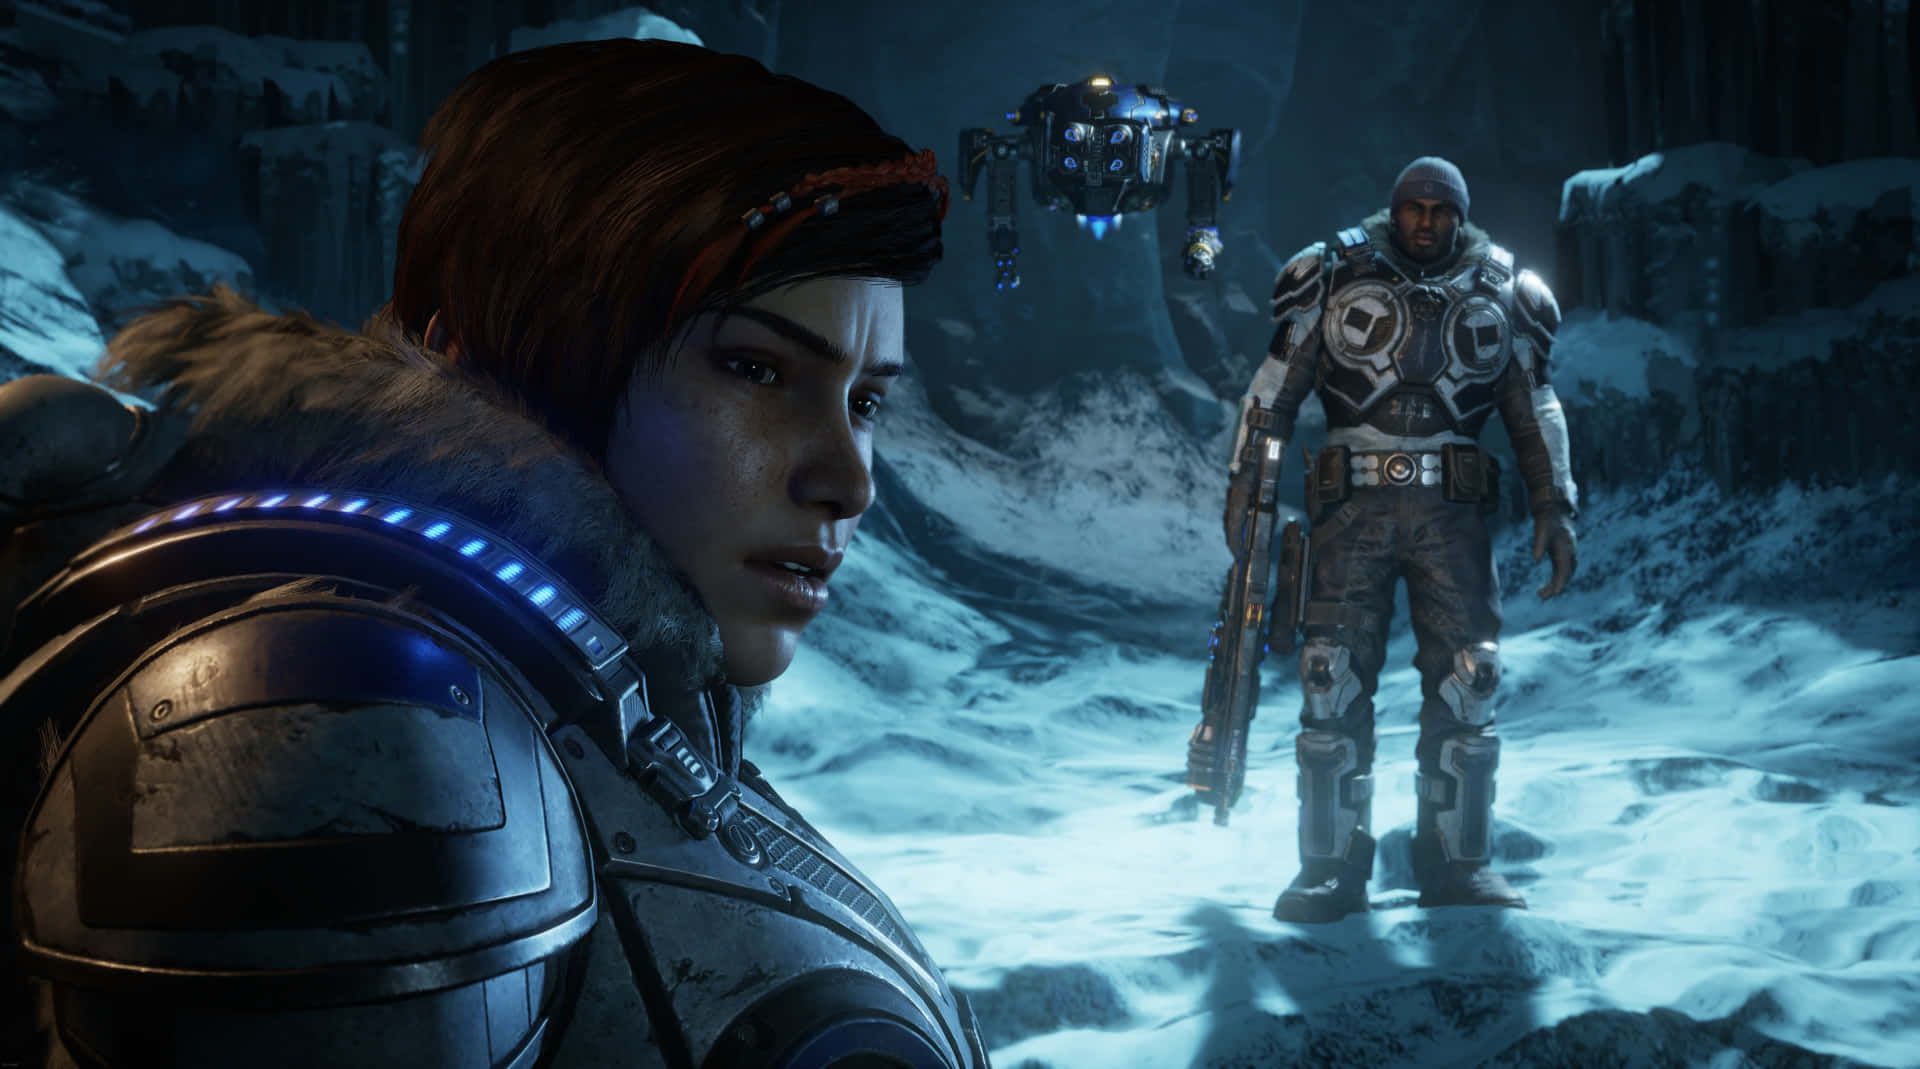 Join the fight and get ready to go to war in the gears of war 5